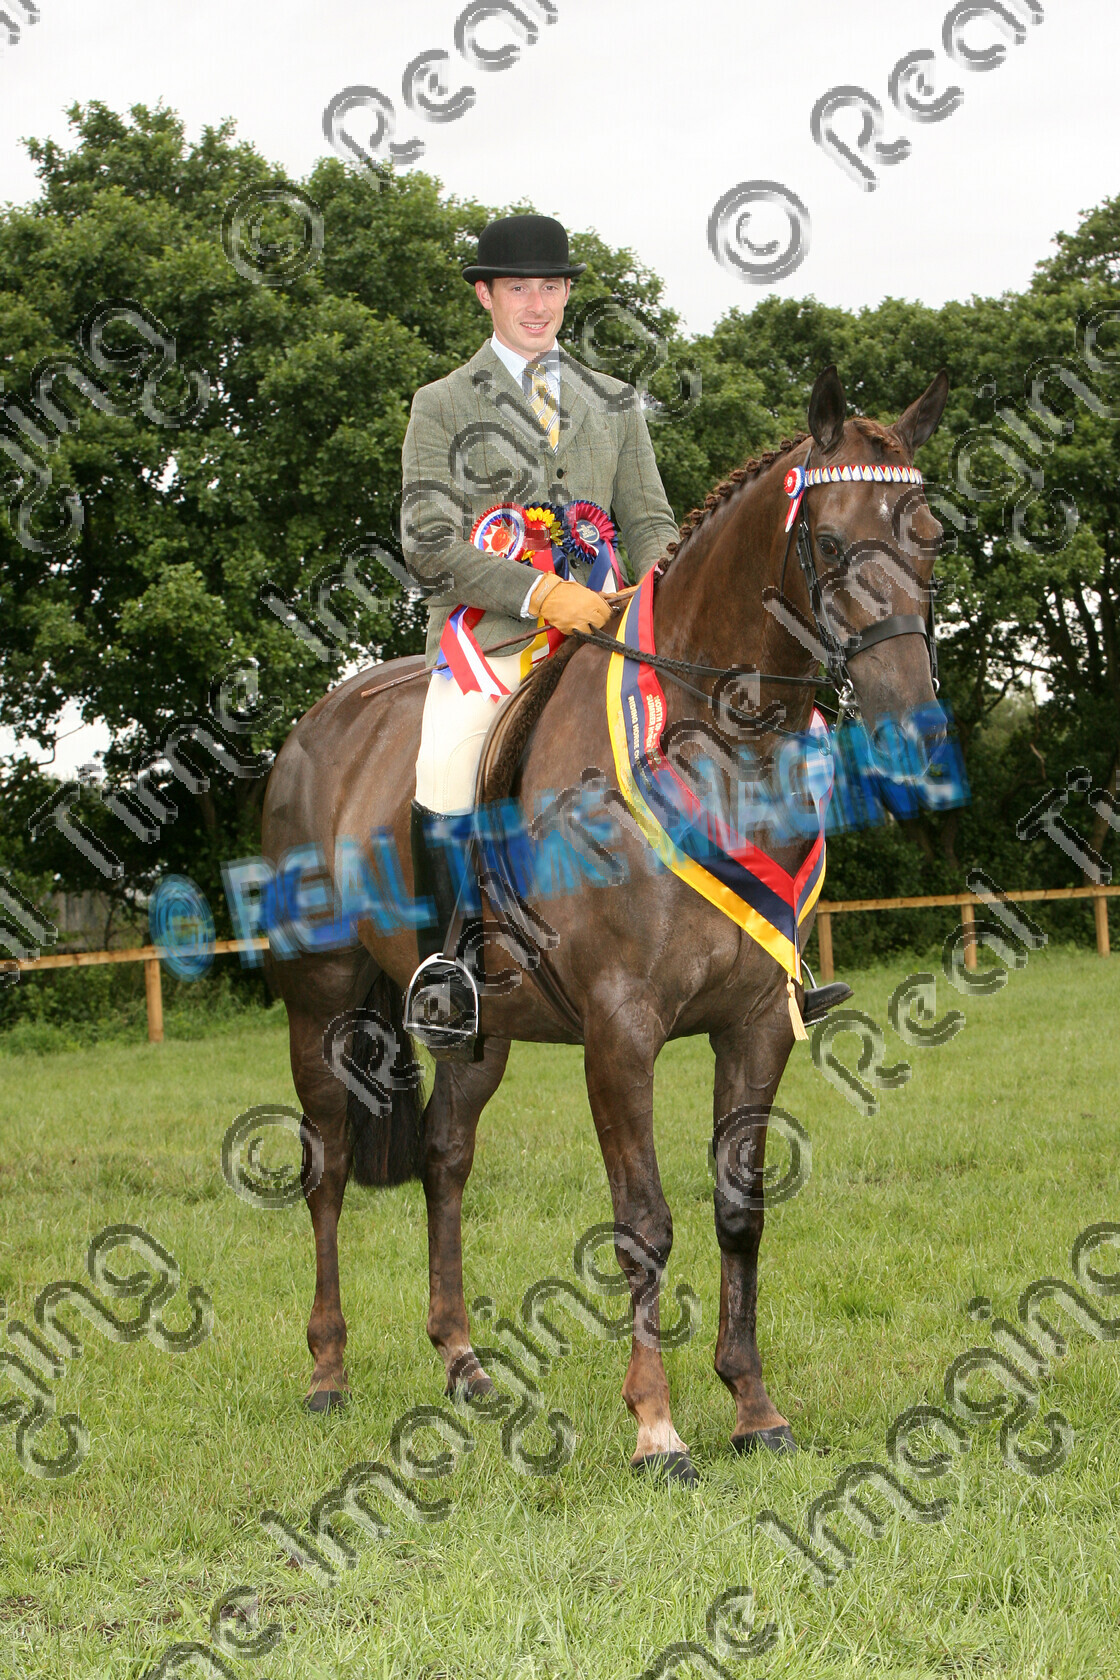 S09-30-11-024 
 Keywords: upright portrait, North Of England Horse Show, Warren Farm, Merseyside, UK, Saturday, 4, July, 2009, HOYS, Riding Horse, Championship, 1st first, winner win won, Champion, 1407, MILITARY CRISIS, `Owner: , Teesdale, T, `Rider: , Simon Charlesworth, chestnut, Small, brow band, Rosette, sash, stand, presentation